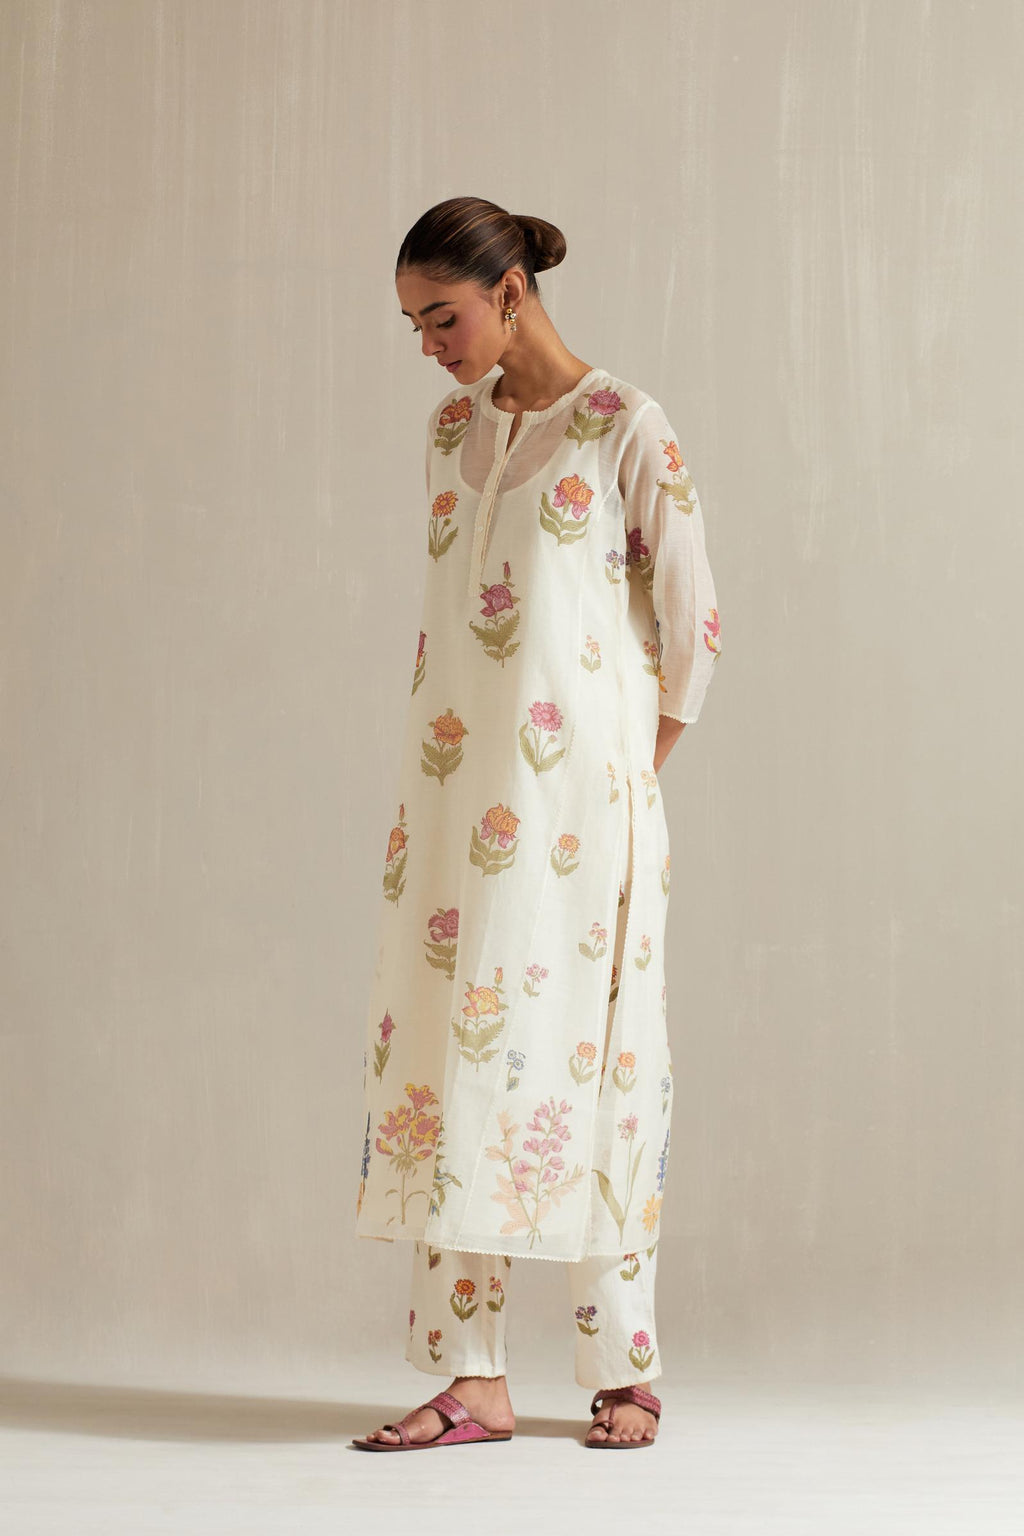 Off white cotton chanderi hand block printed straight kurta set with all-over multi colored flowers and side panels.